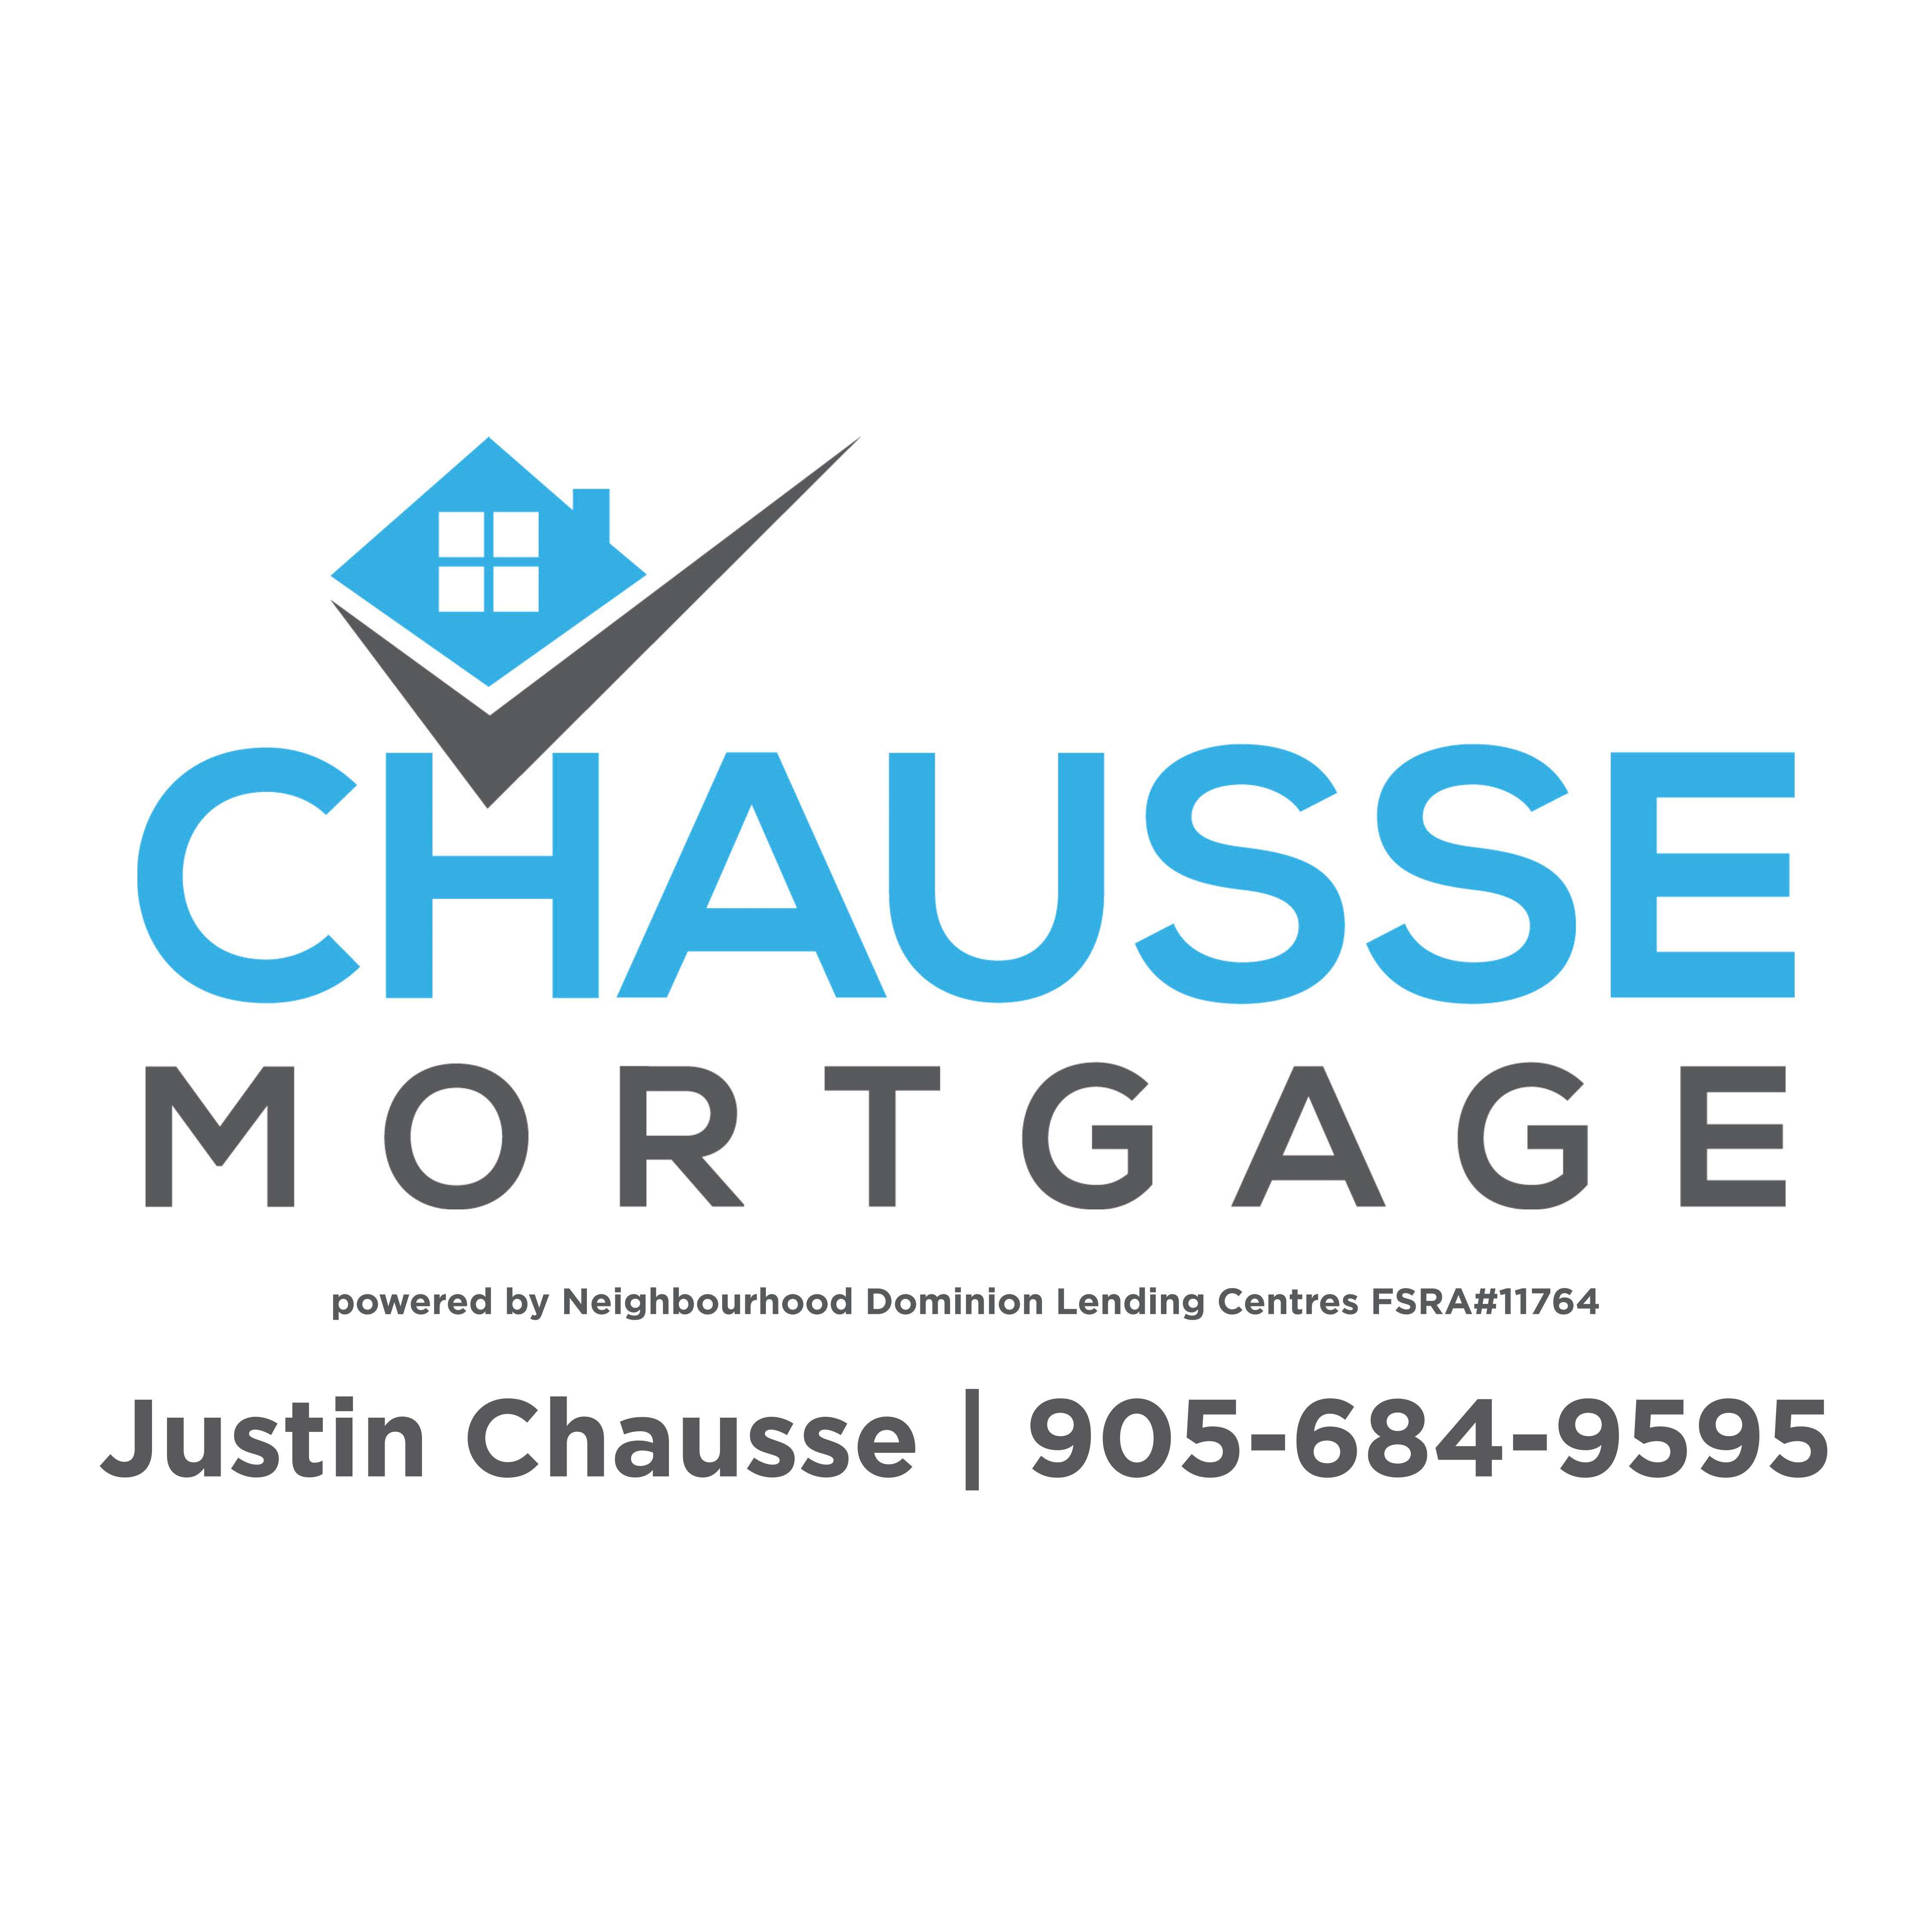 Justin Chausse Mortgages	